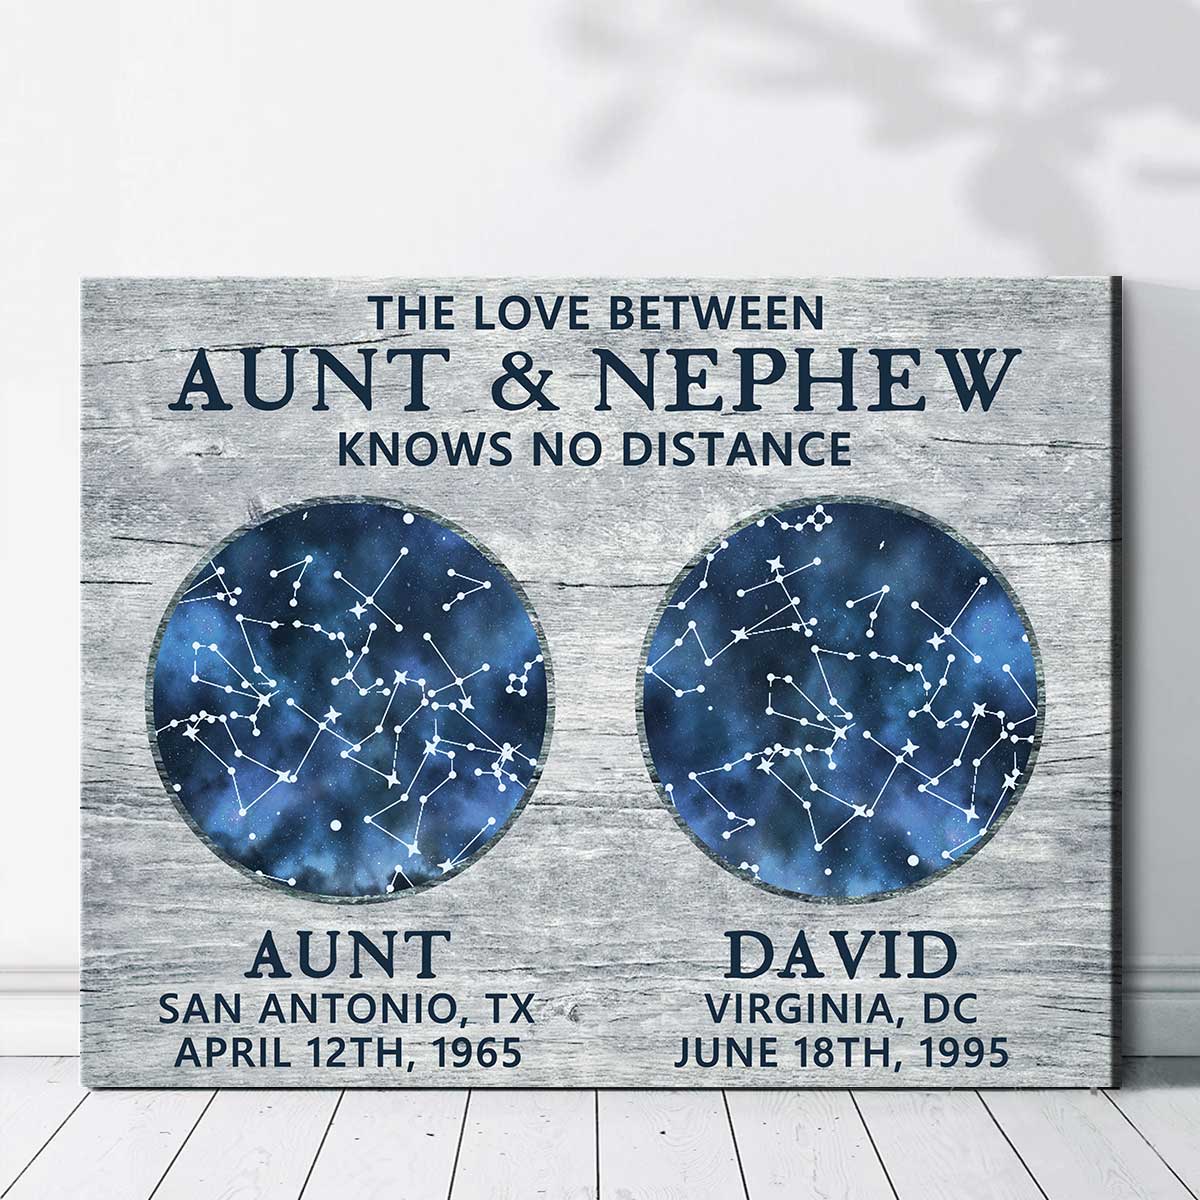 https://benicee.com/wp-content/uploads/2022/09/Personalized-Christmas-Gifts-for-Aunts-from-Nephew-Long-Distance-Aunt-Nephew-print-Nephew-Christmas-Gifts-from-Auntie-3_753caf03-6310-4e99-a3f3-5b17a0d30a39.jpg